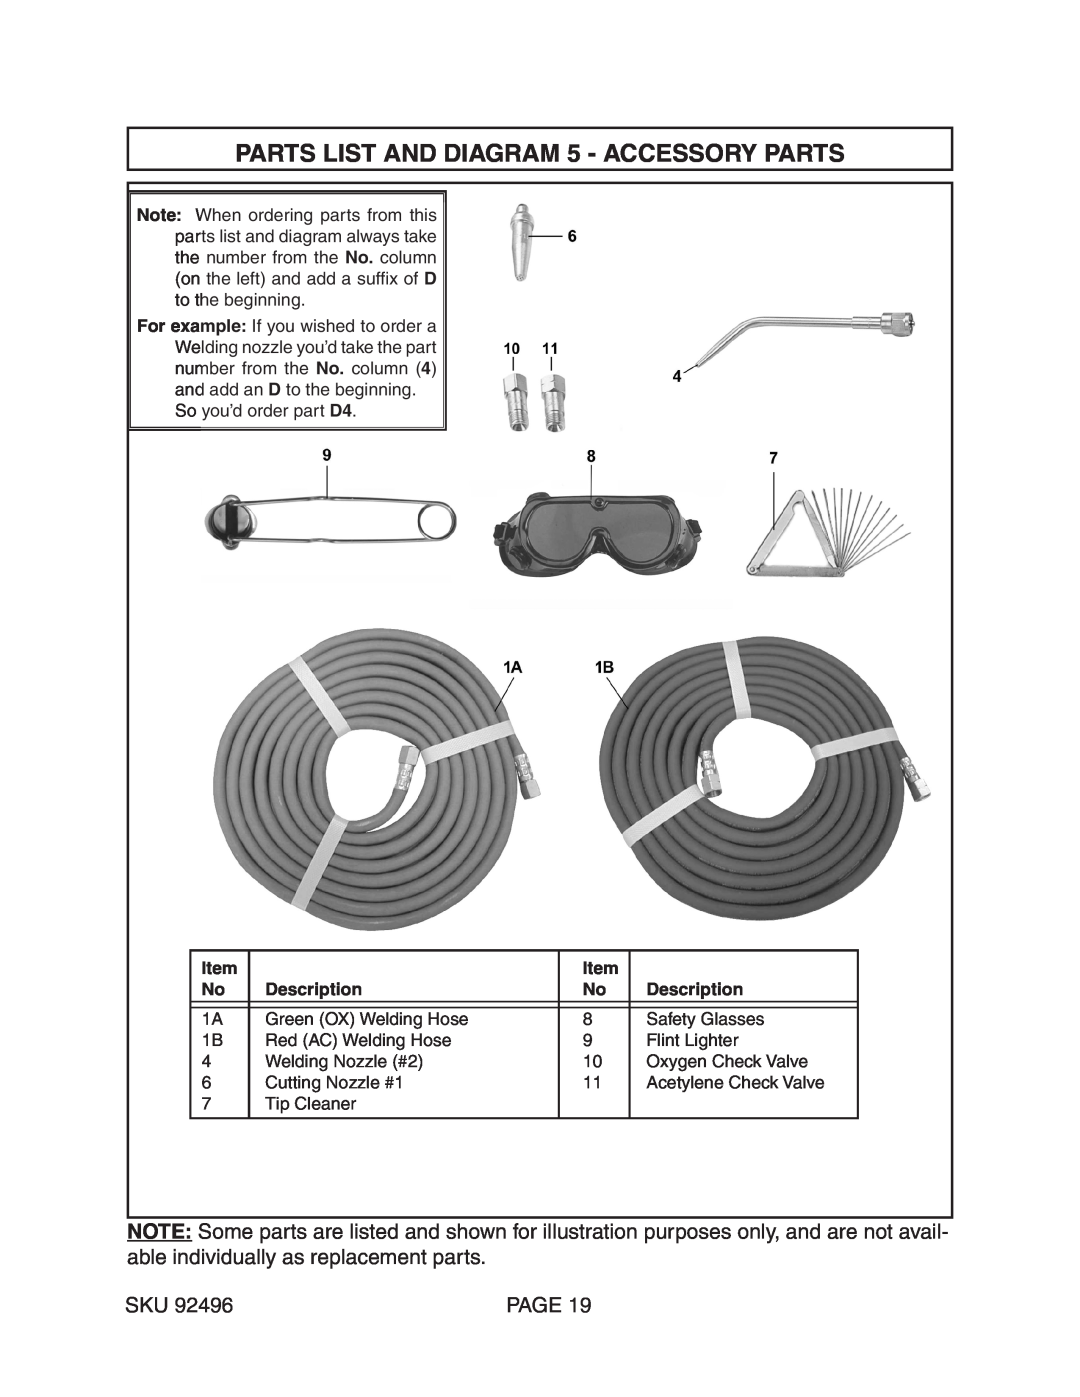 Chicago Electric 92496 operating instructions PARTS LIST AND DIAGRAM 5 - ACCESSORY PARTS 